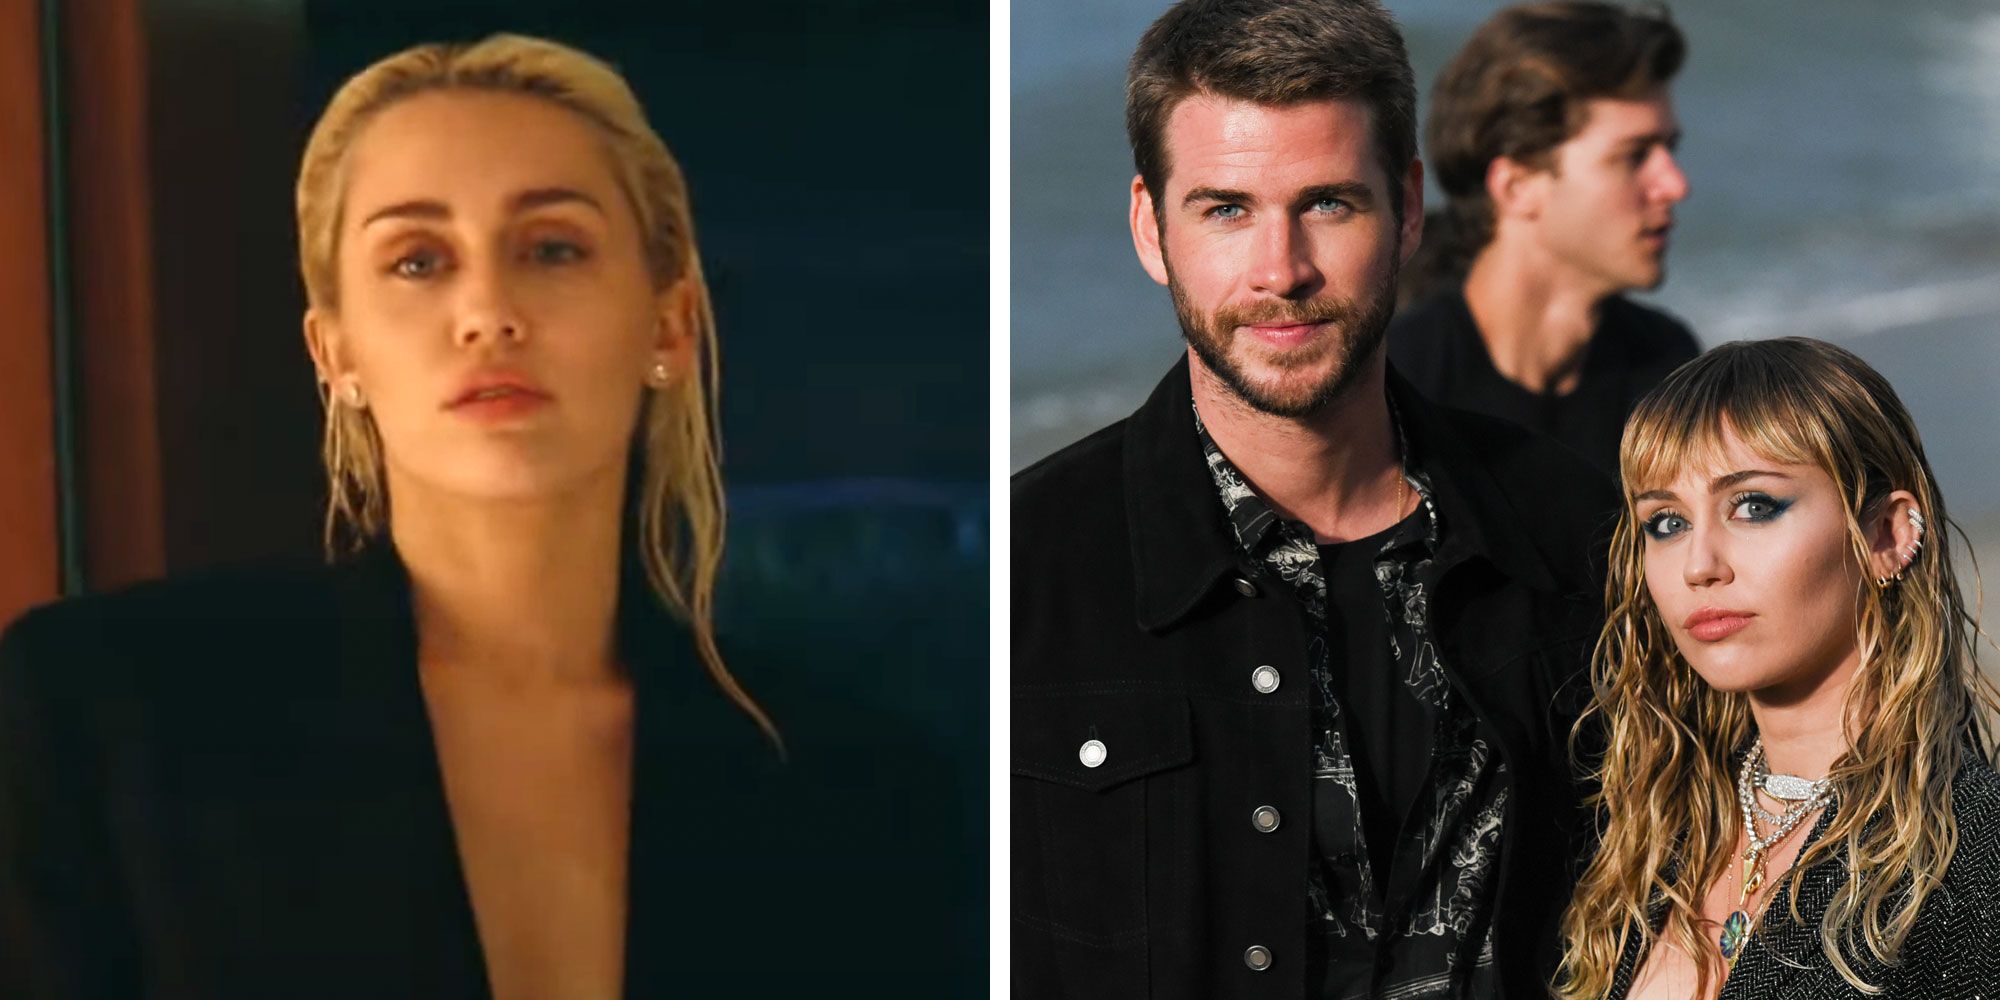 Are Miley Cyrus's 'Flowers' Lyrics About Liam Hemsworth? - Song Meaning